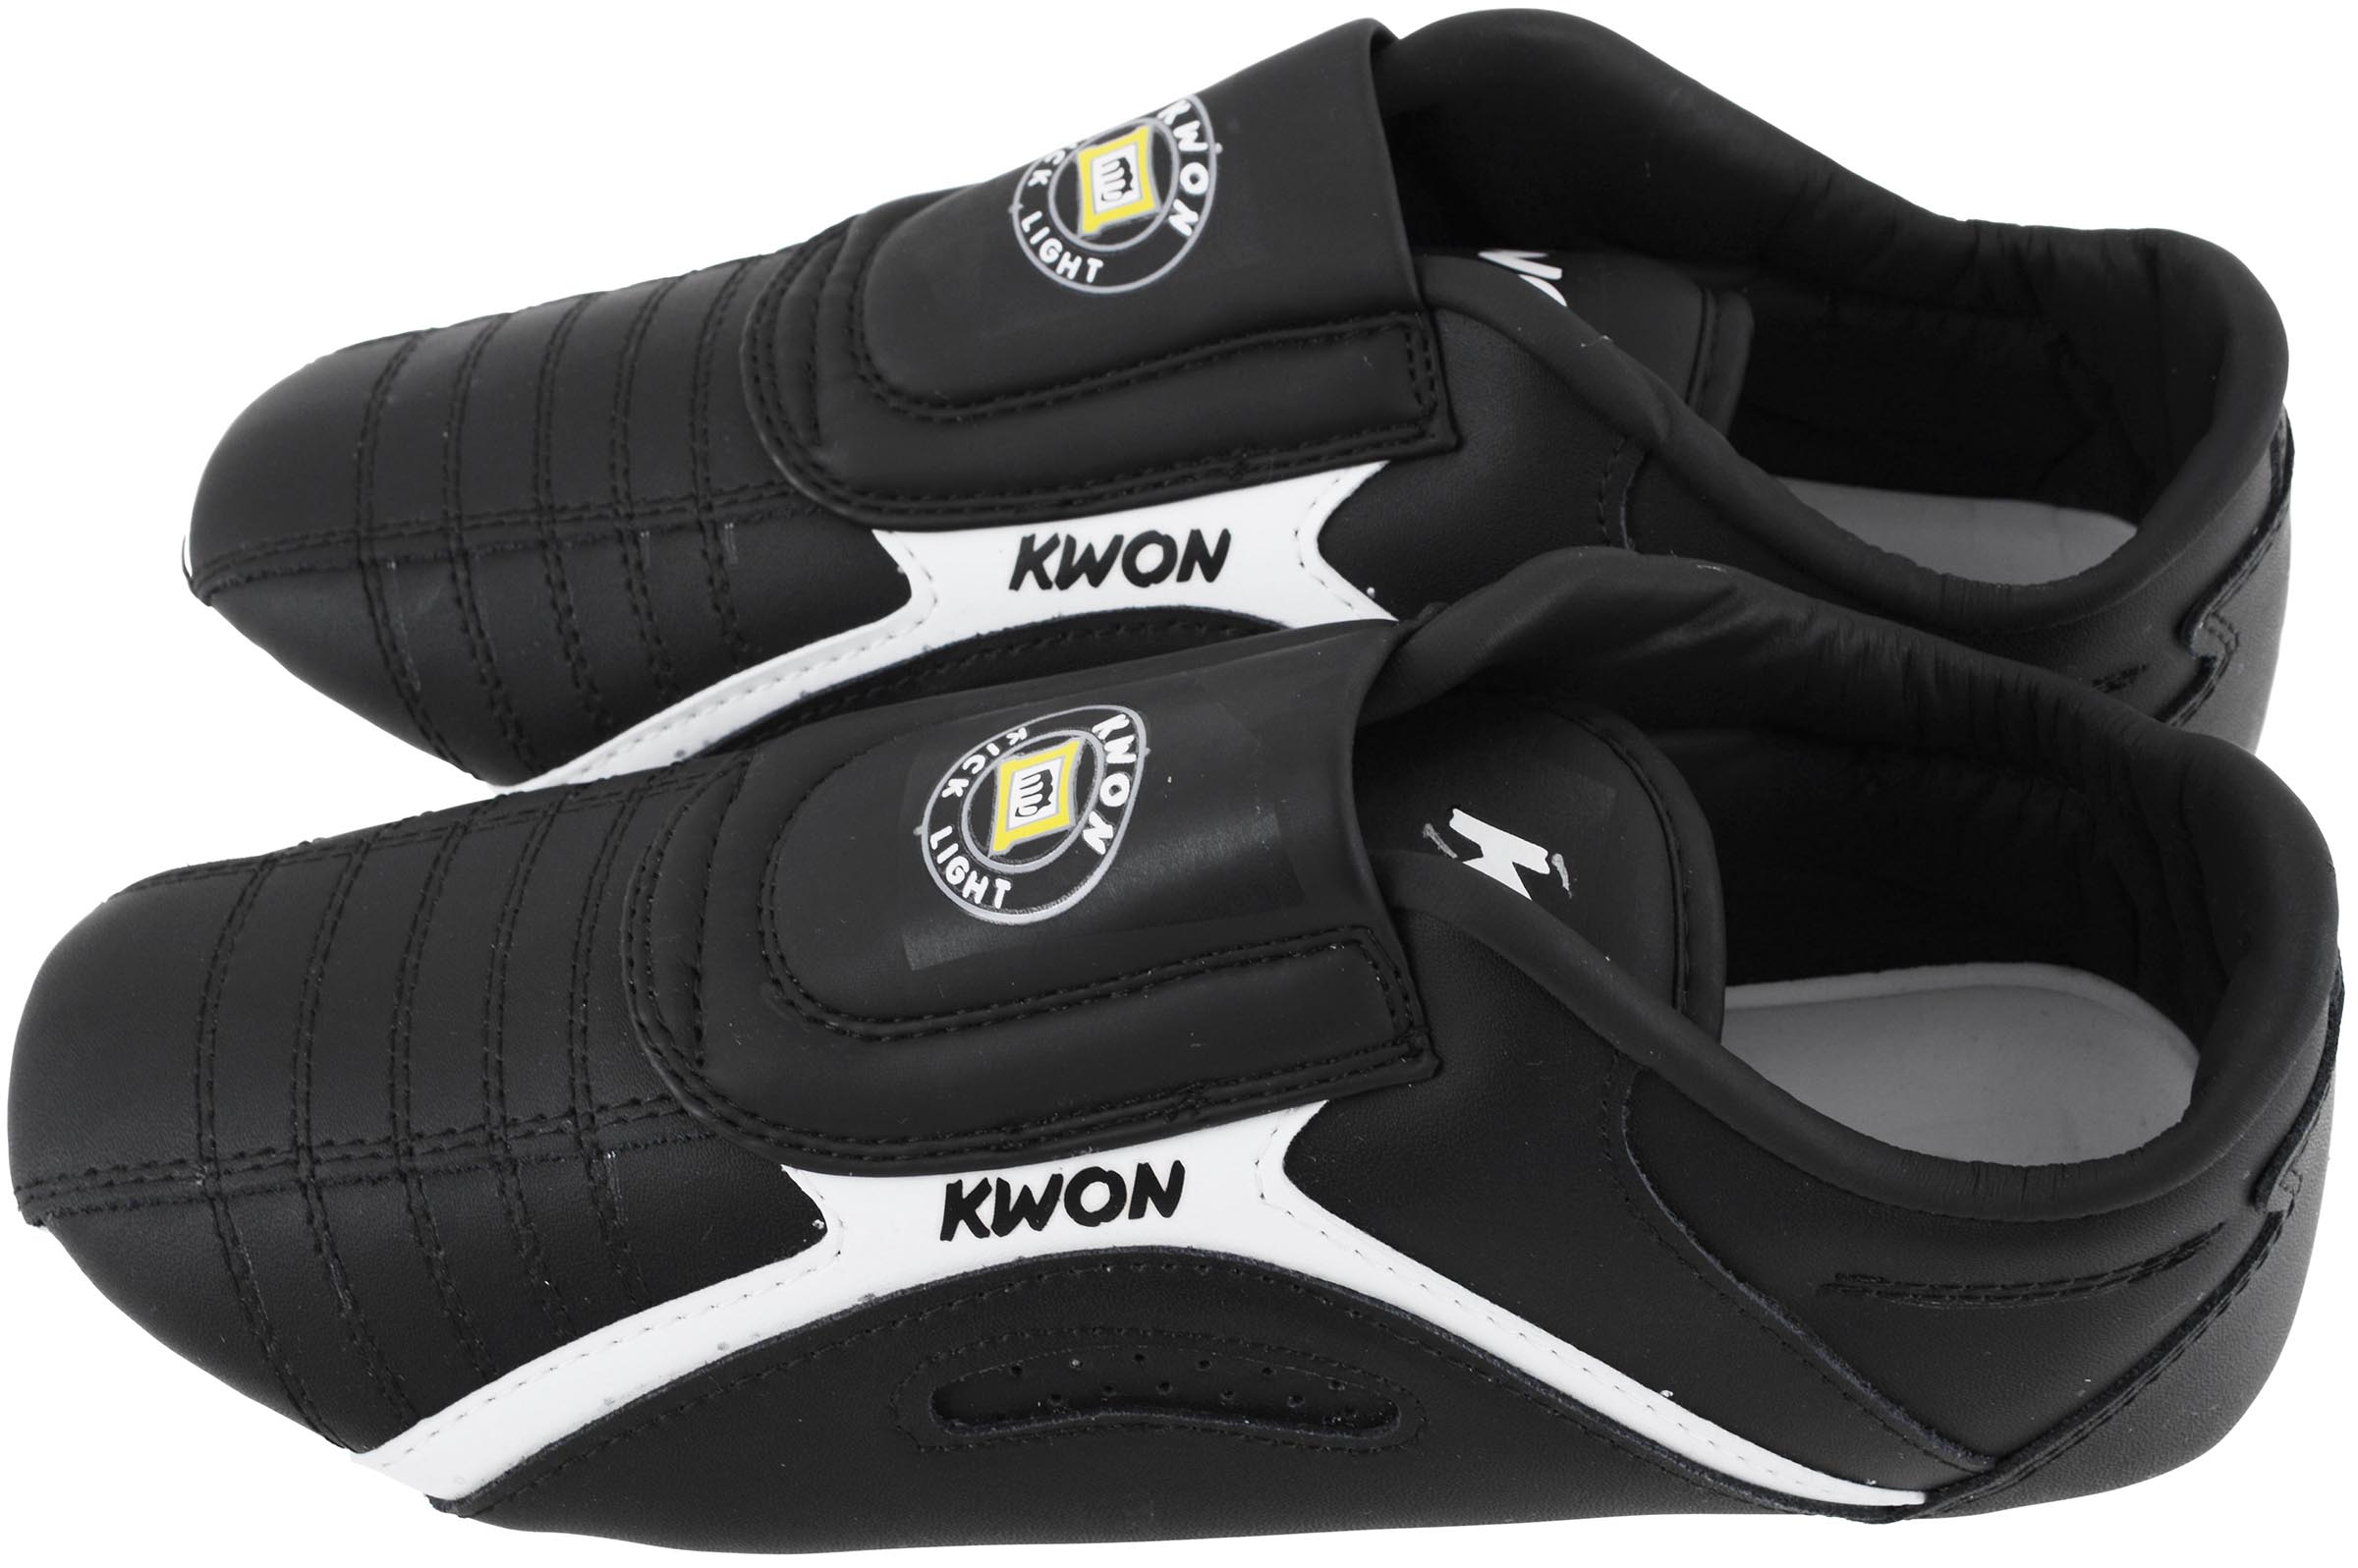 Chaussures chinoises noires - Kwon 60116